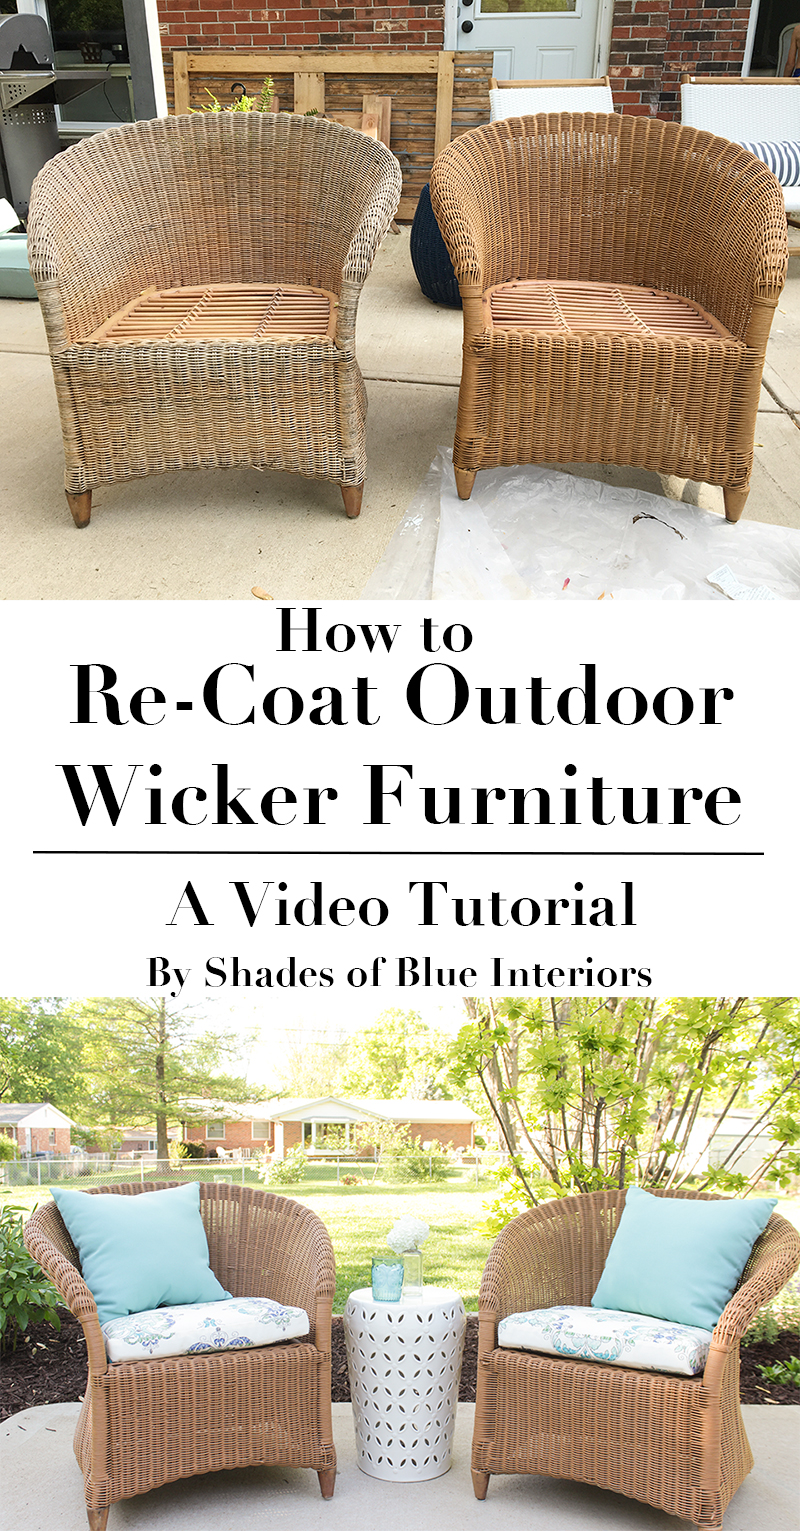 How-to-ReCoat-Wicker-Furniture